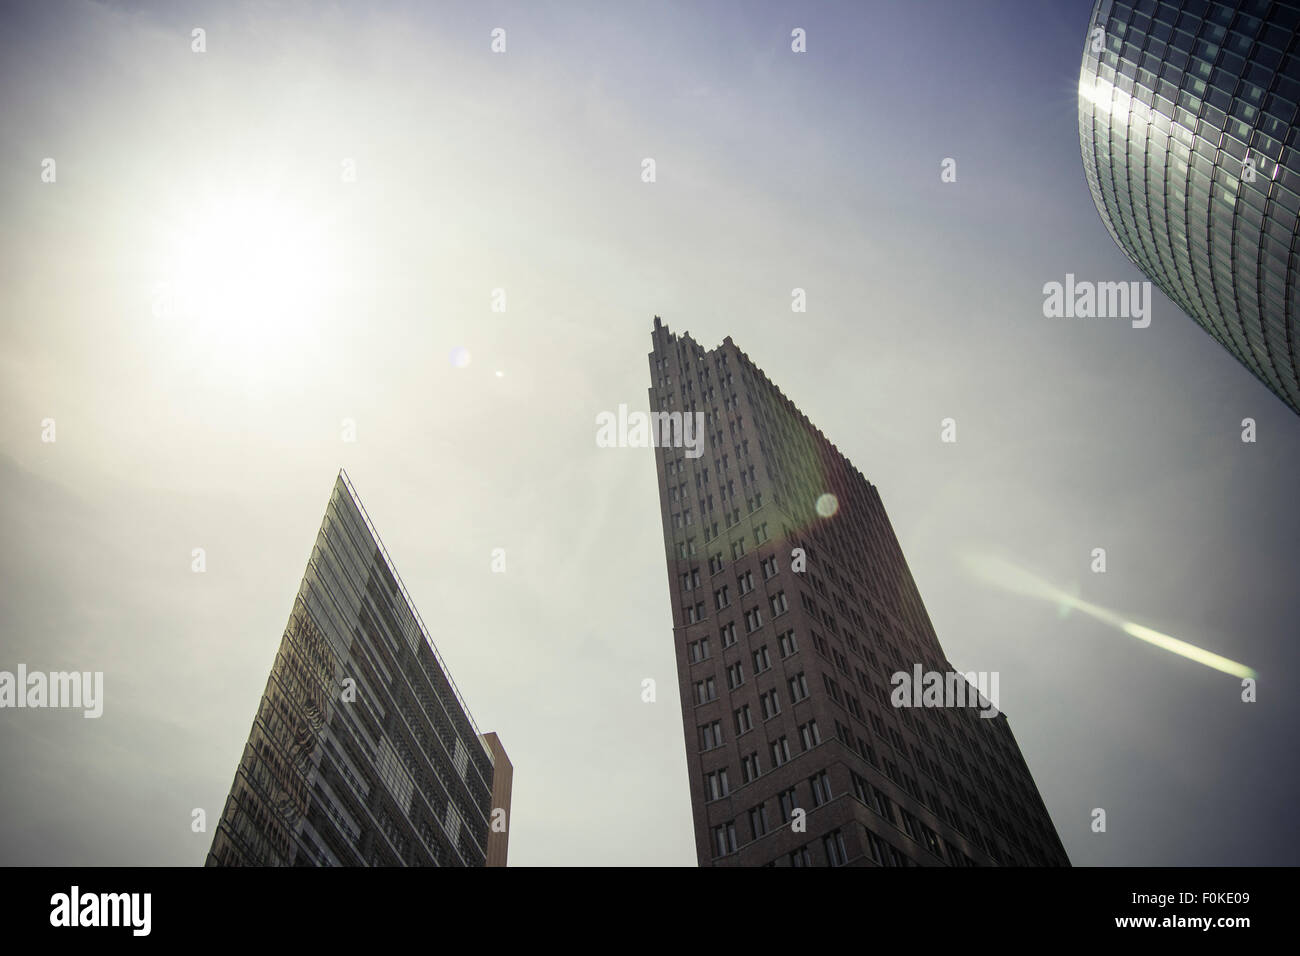 Germany, Berlin, AtriumTower, Kollhoff-Tower and Bahntower at Potsdam Square Stock Photo